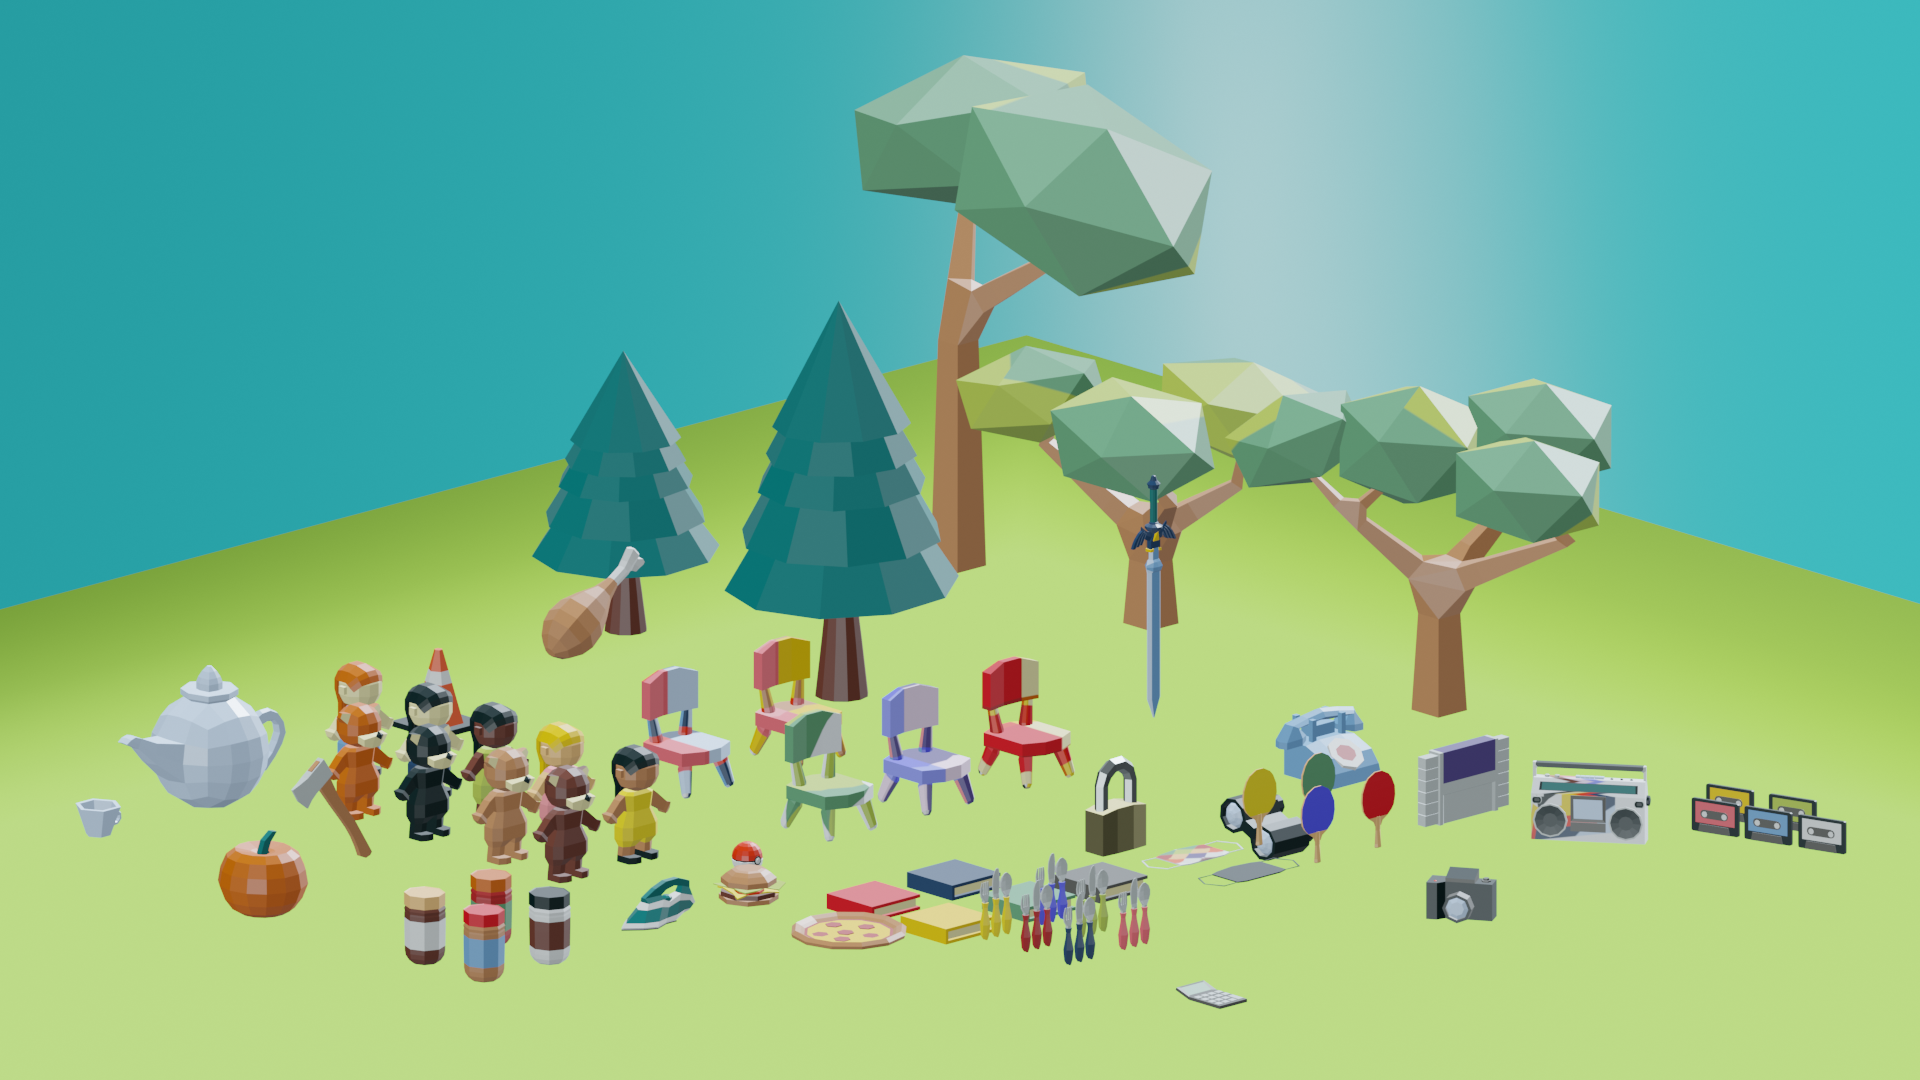 render of many lowpoly style 3D objects